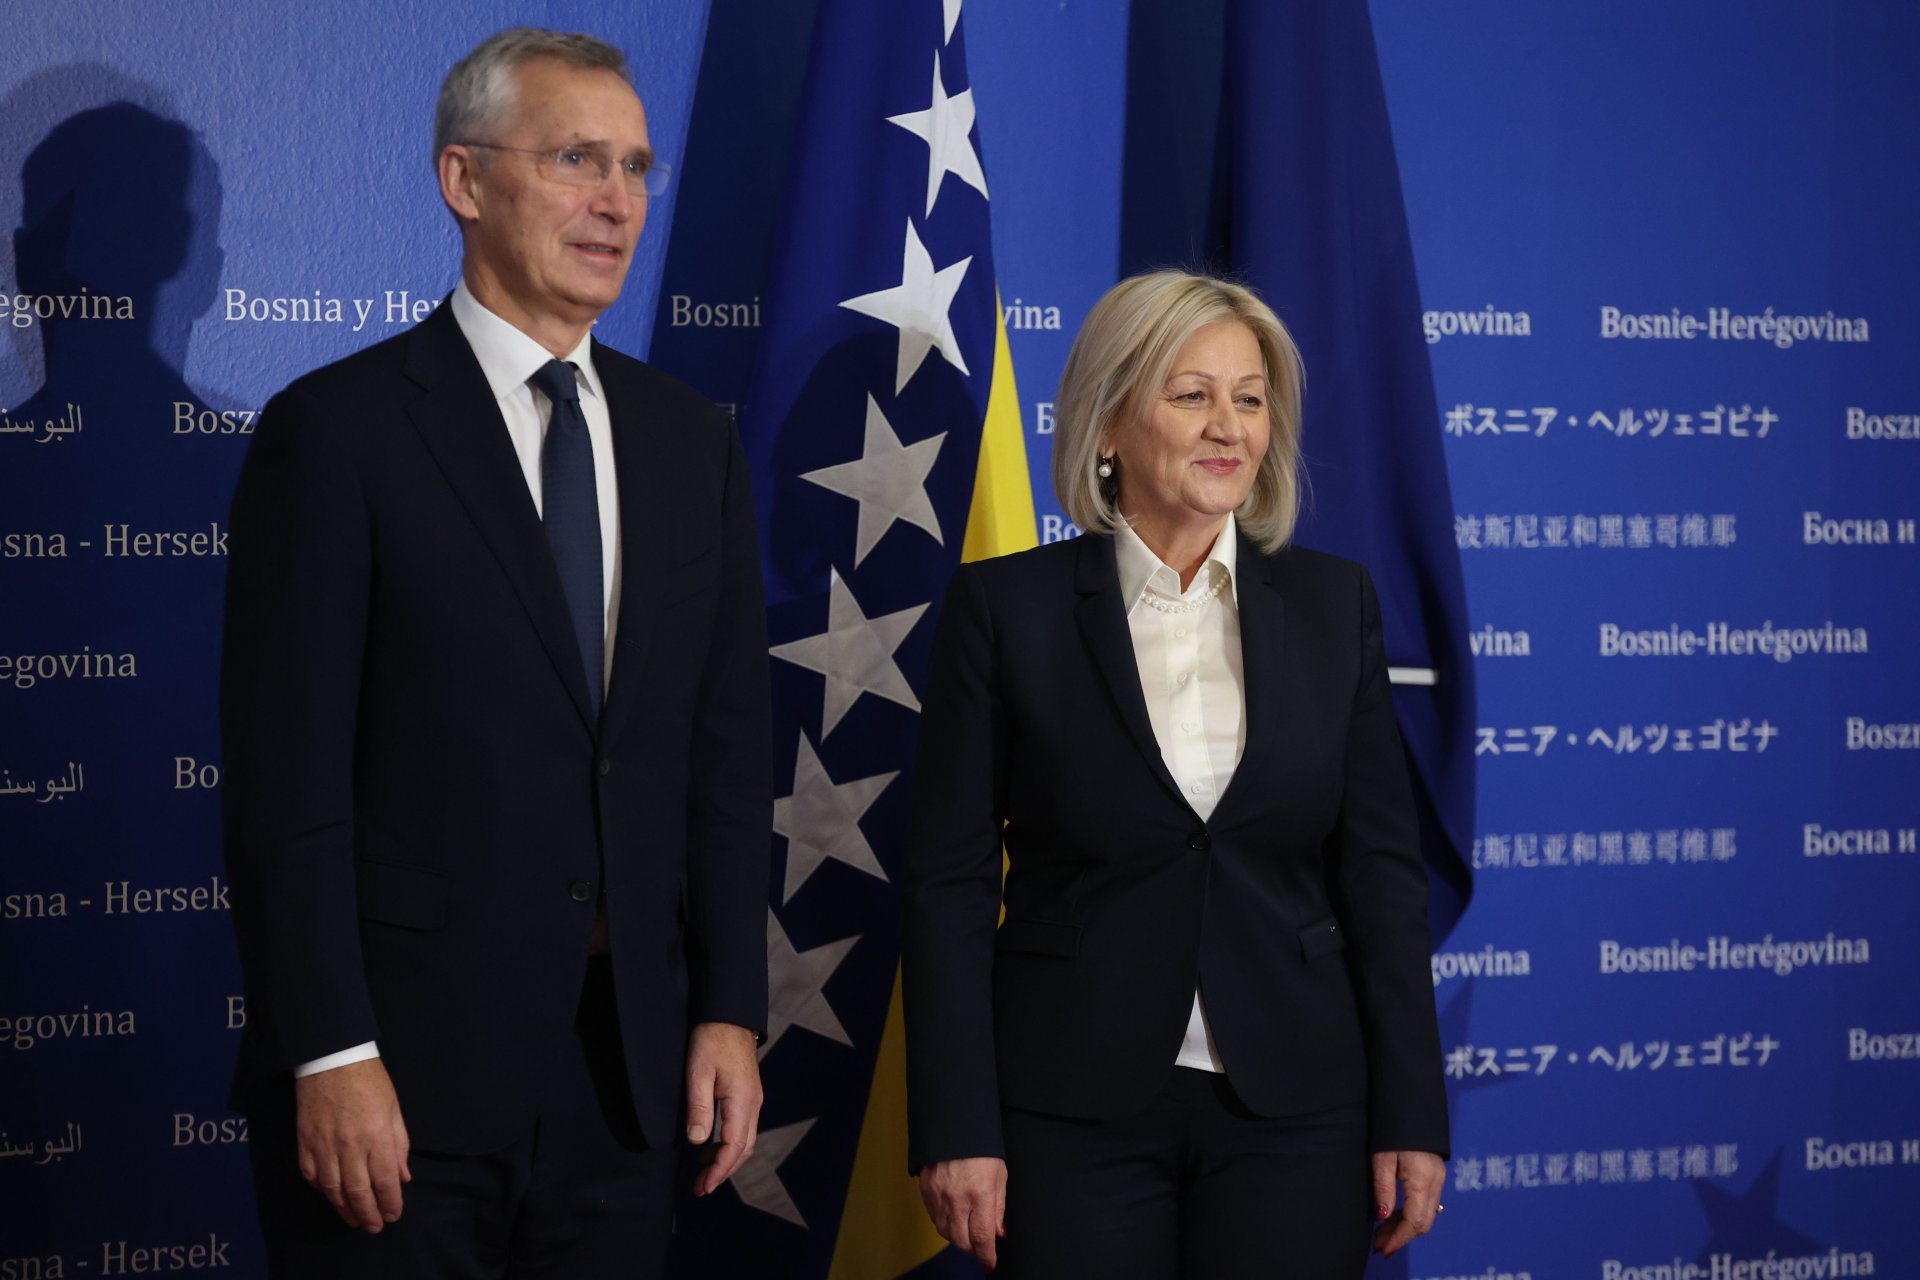 Stoltenberg: NATO remains committed to supporting BiH's Euro-Atlantic path